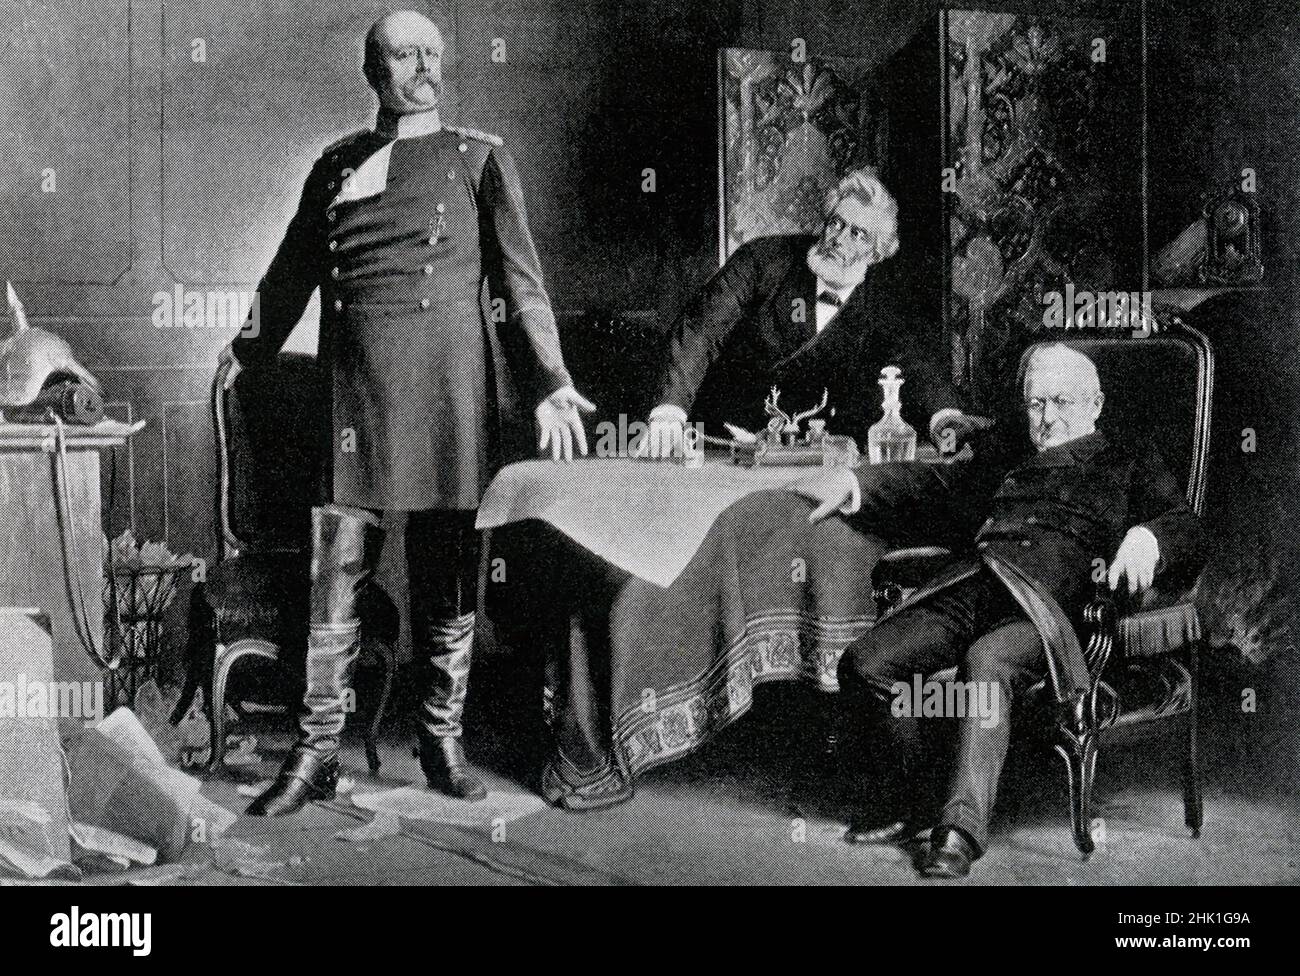 Shown here is the meeting at Versailles between Otto von Bismarck (left) and Adolphe Thiers (seated far right) at the Palace of Versailles France. Bismarck is dictating the terms of peace to Thiers in February of 1871. Bismarck had ordered the city of Paris to be bombarded with large-caliber Krupp siege guns. This prompted the city's surrender on 28 January 1871. Secret armistice discussions began on January 23, 1871 and continued at Versailles. The Franco-Prussian War or Franco-German War, often referred to in France as the War of 1870, was a conflict between the Second French Empire and the Stock Photo